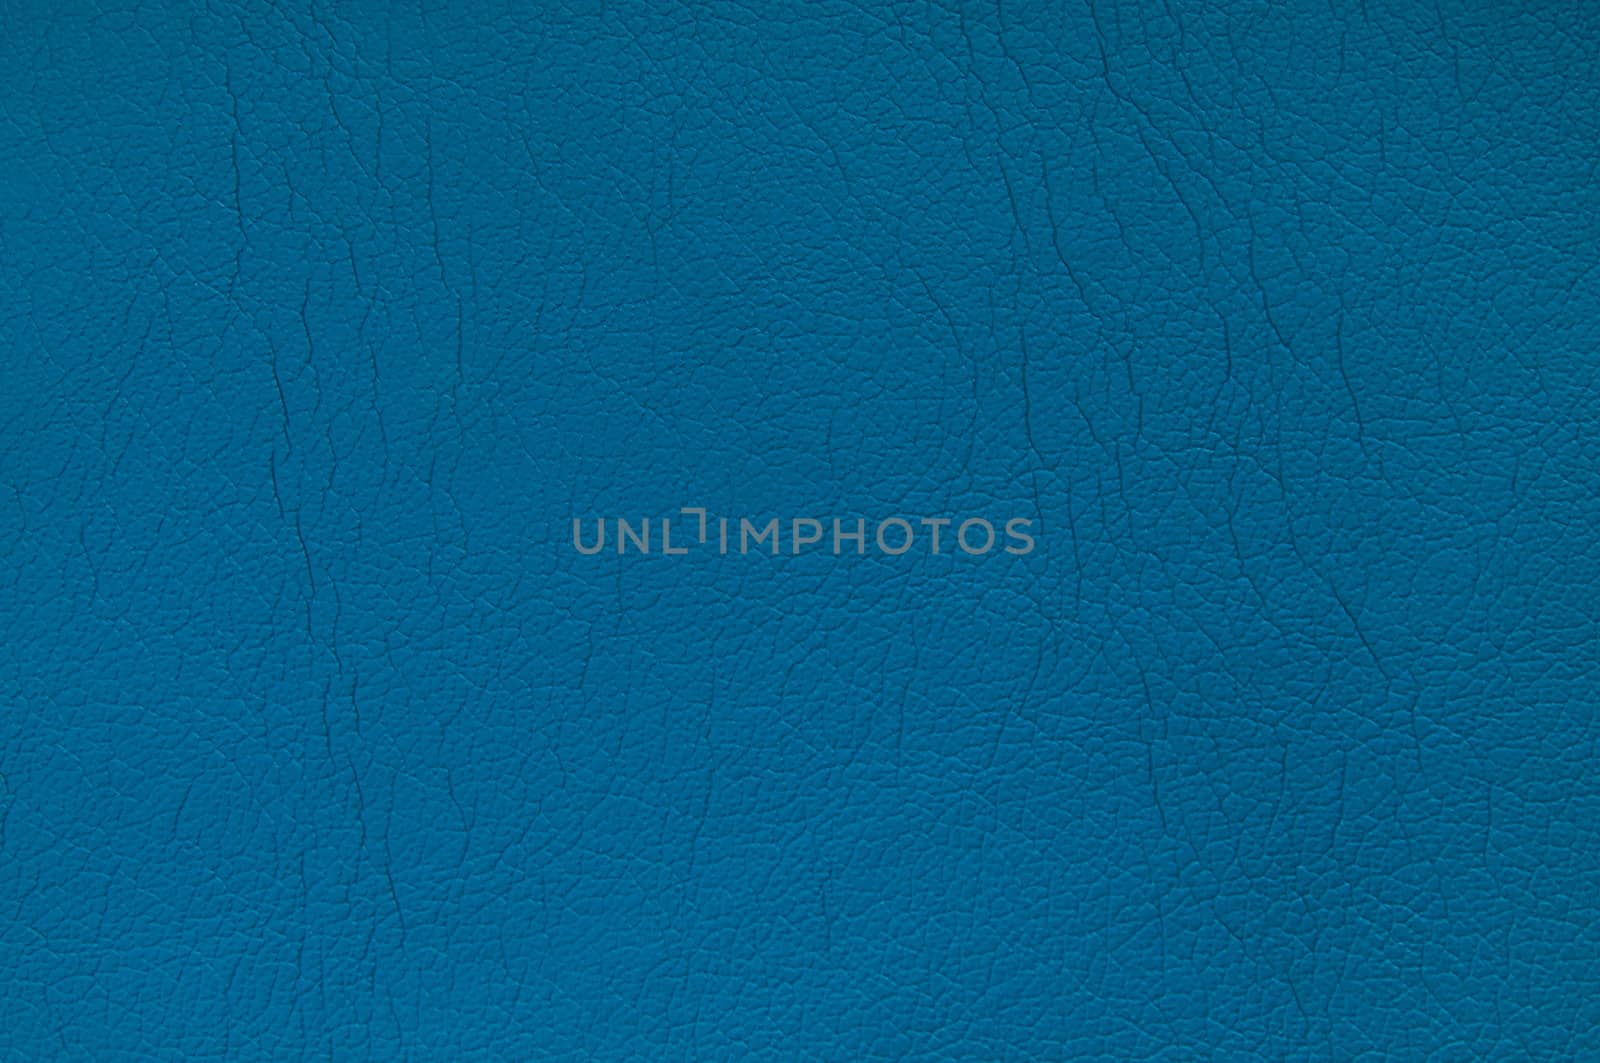 Blue leather background